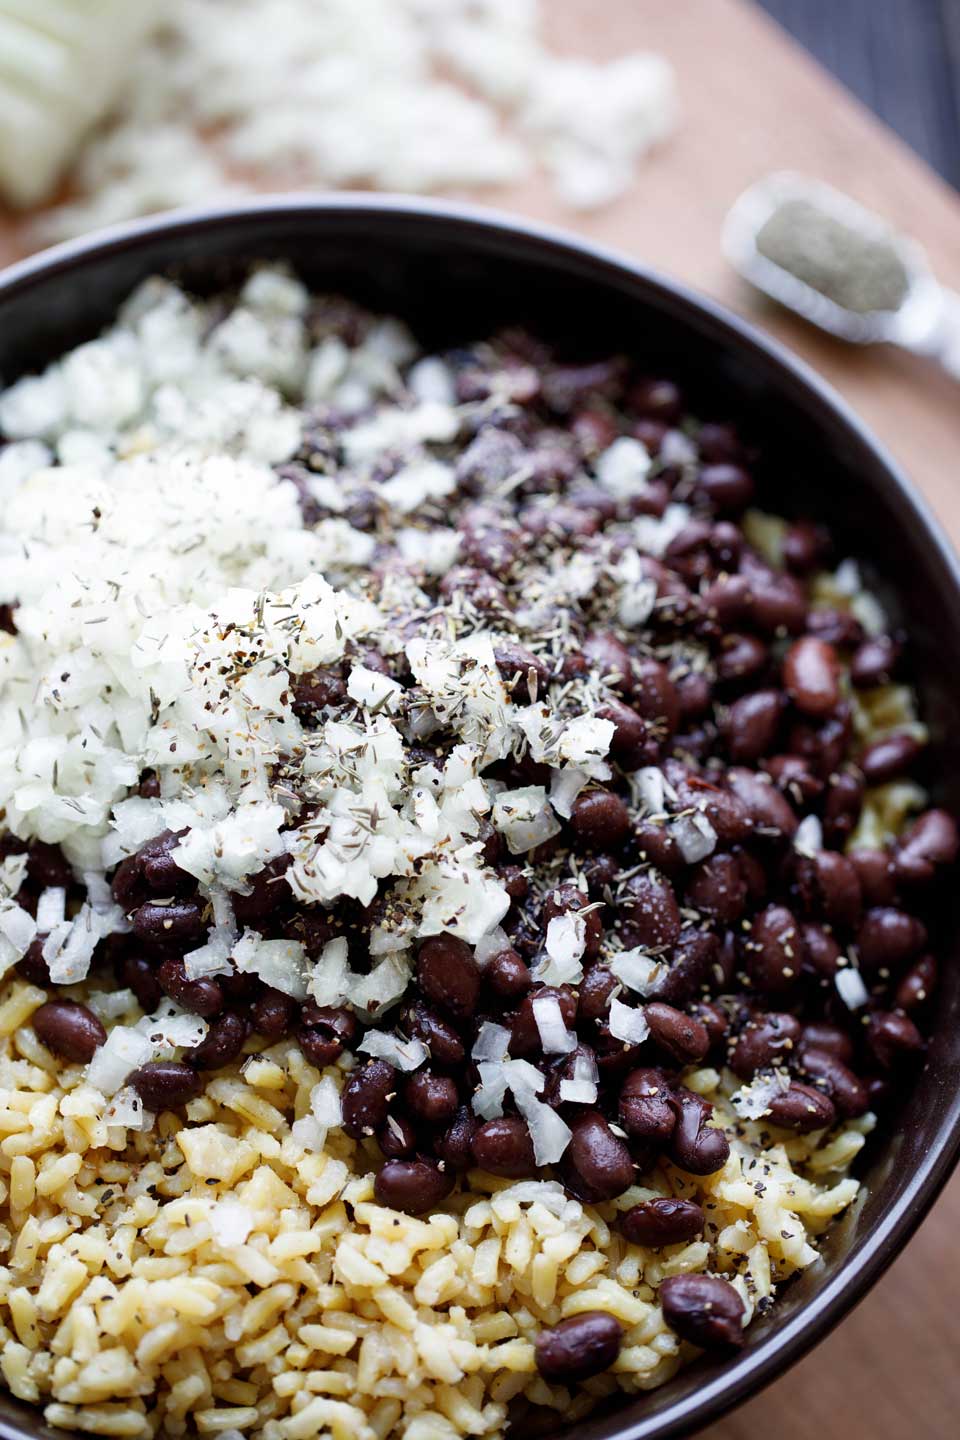 Recipe ingredients piled in a bowl, ready to mix together - black beans, rice, onions and spices